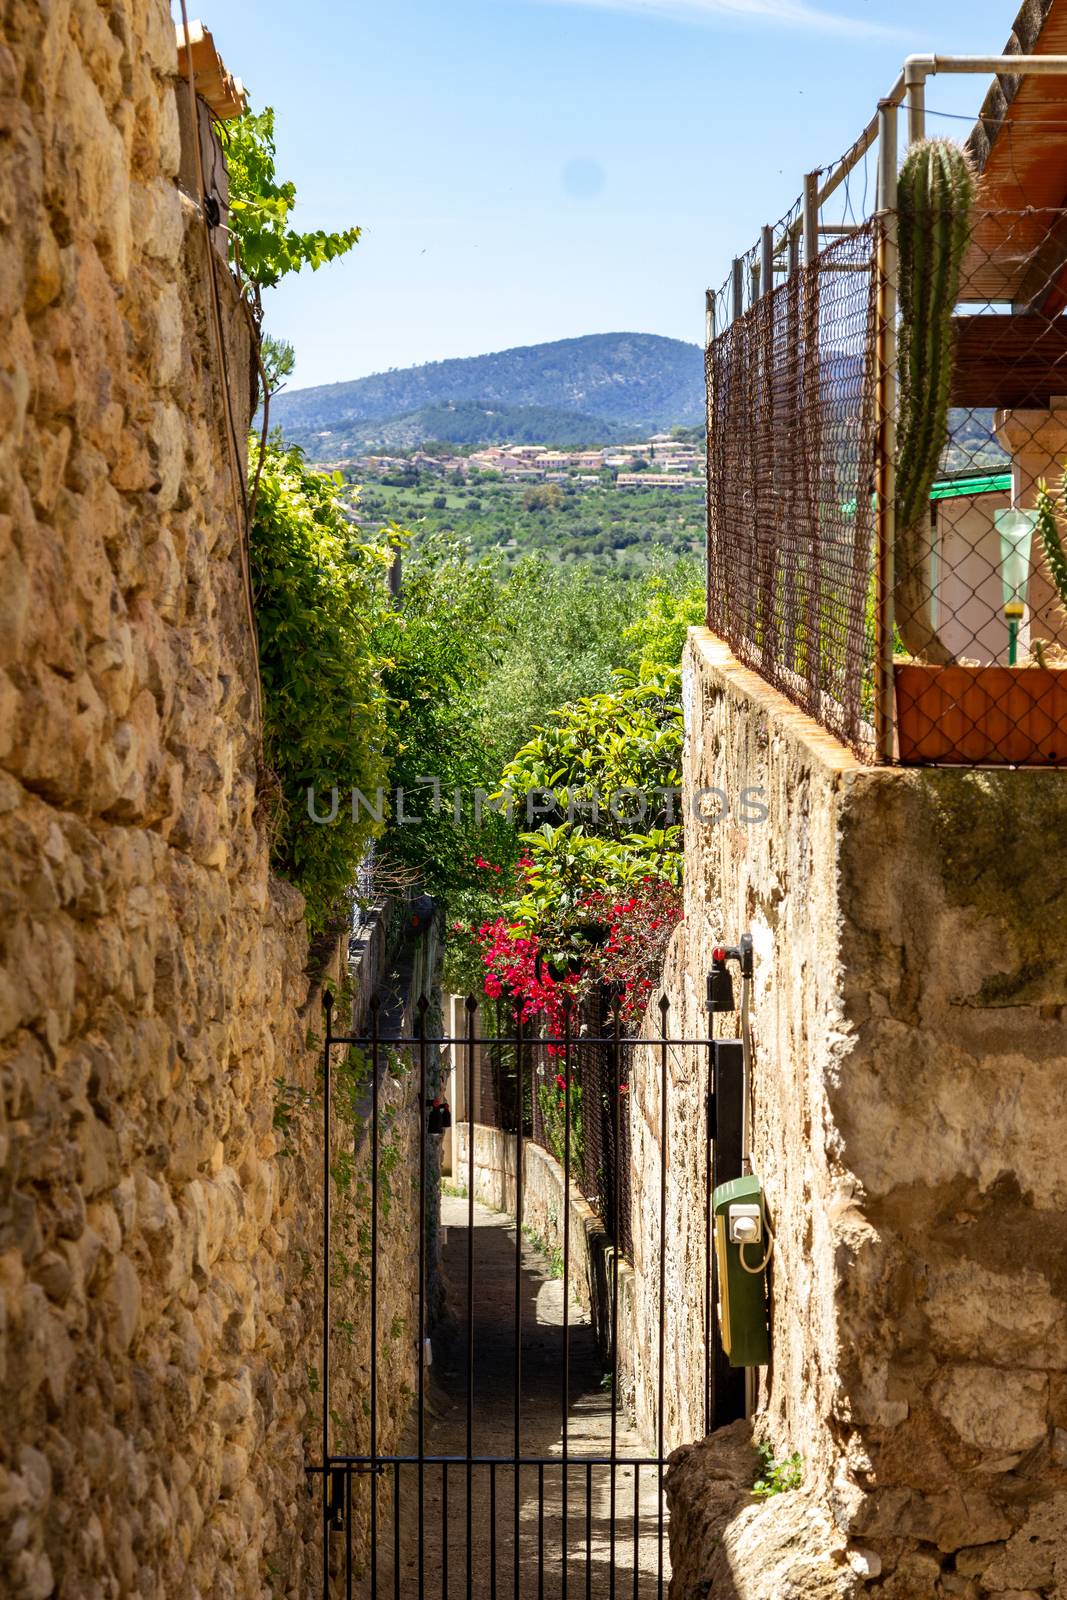 The village Campanet at Mallorca by reinerc